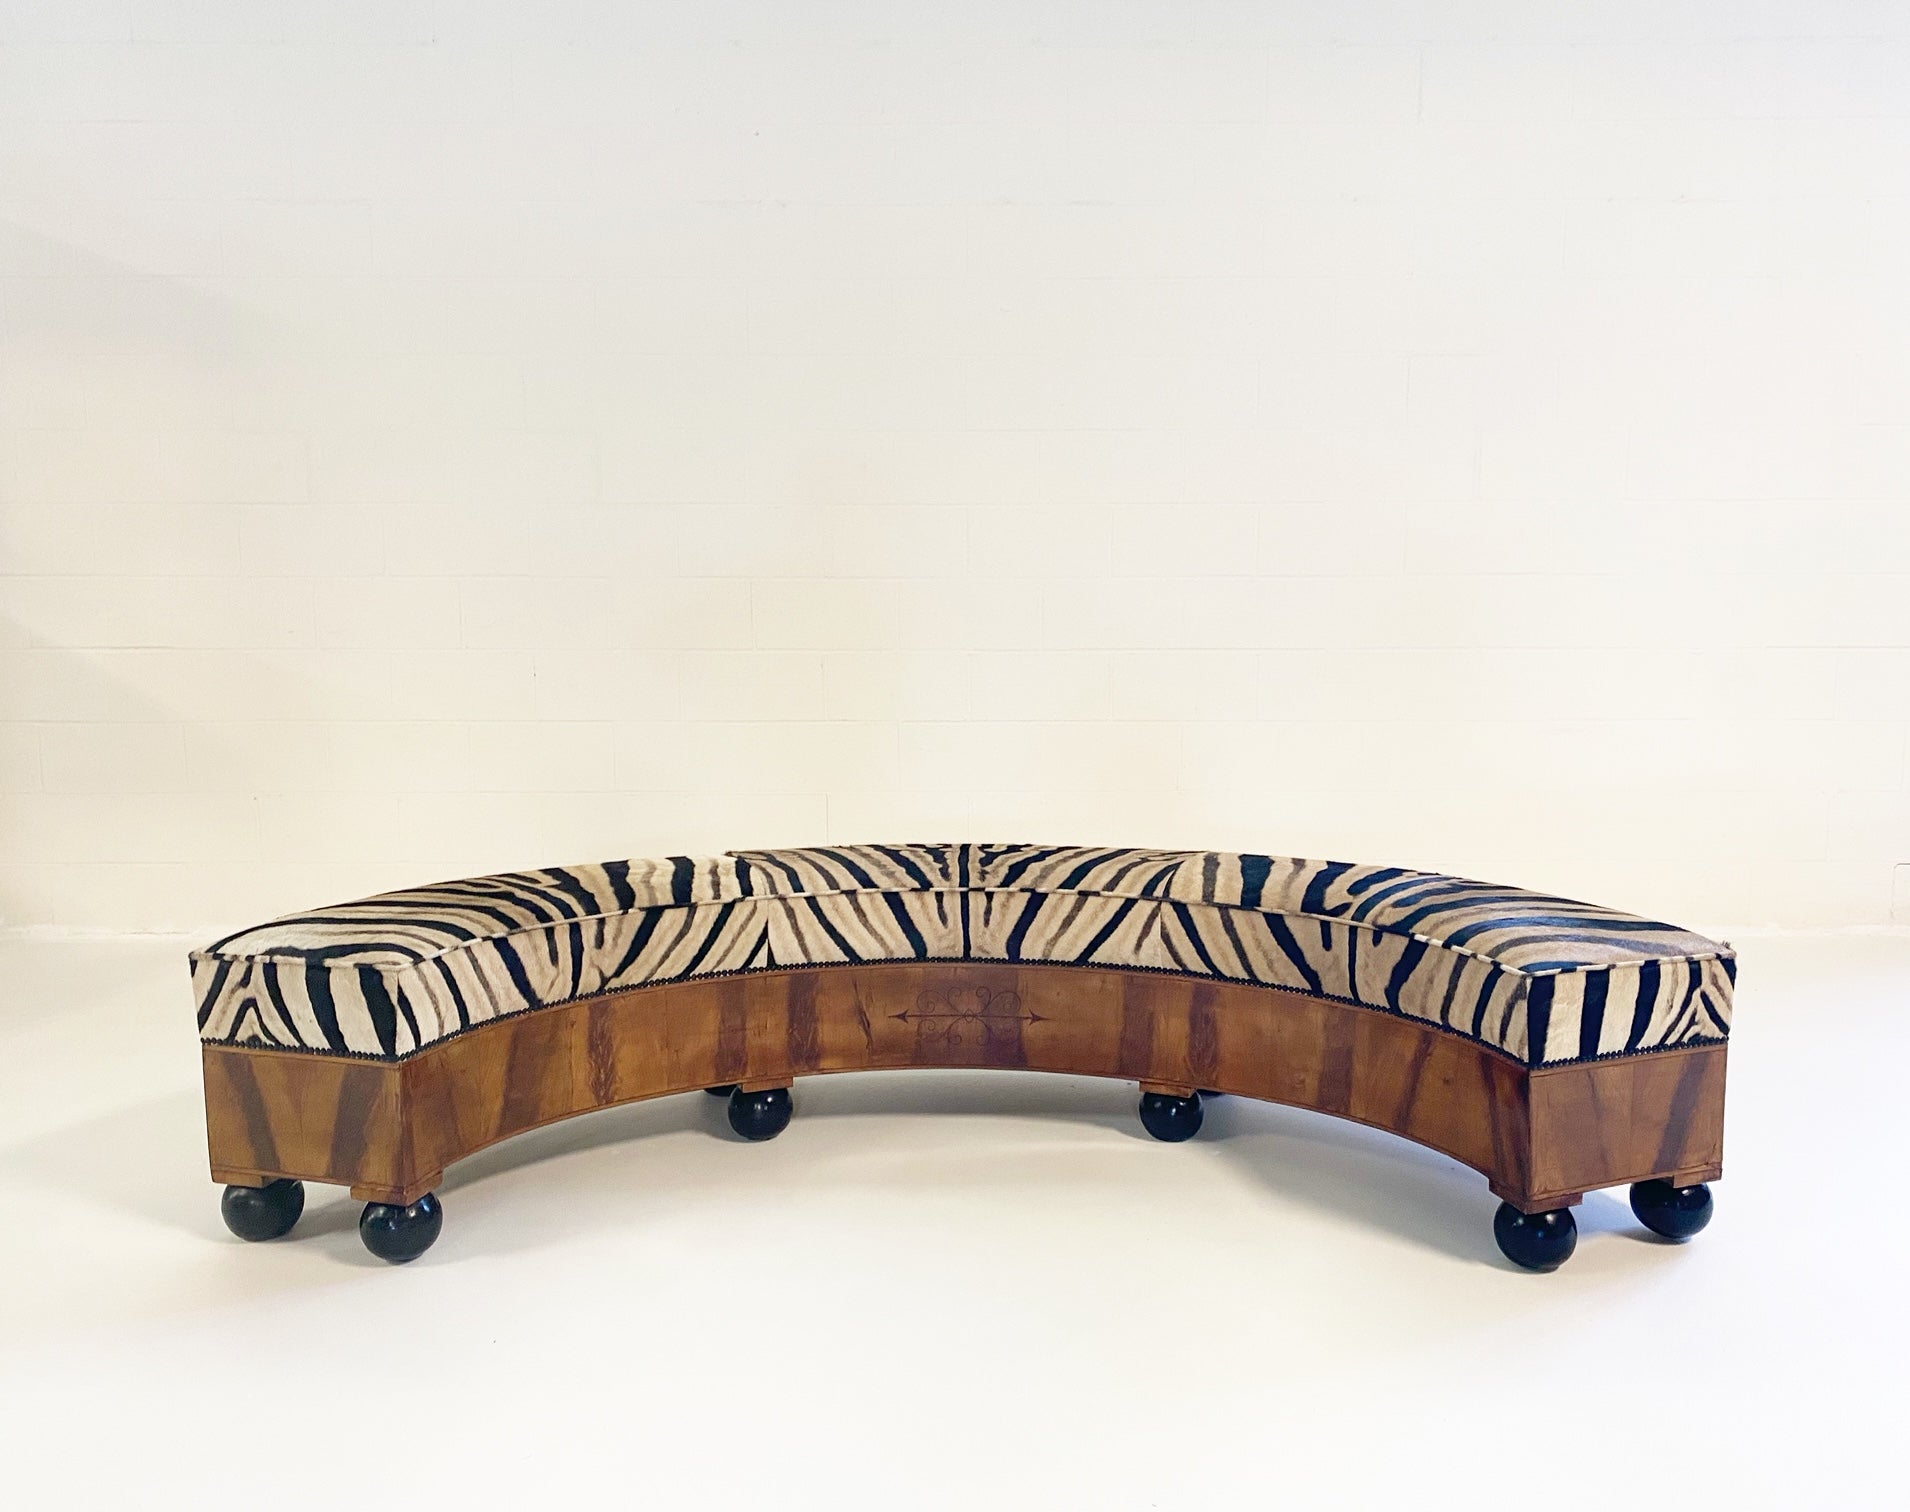 19th Century Fruitwood Banquette in Zebra Hide - FORSYTH